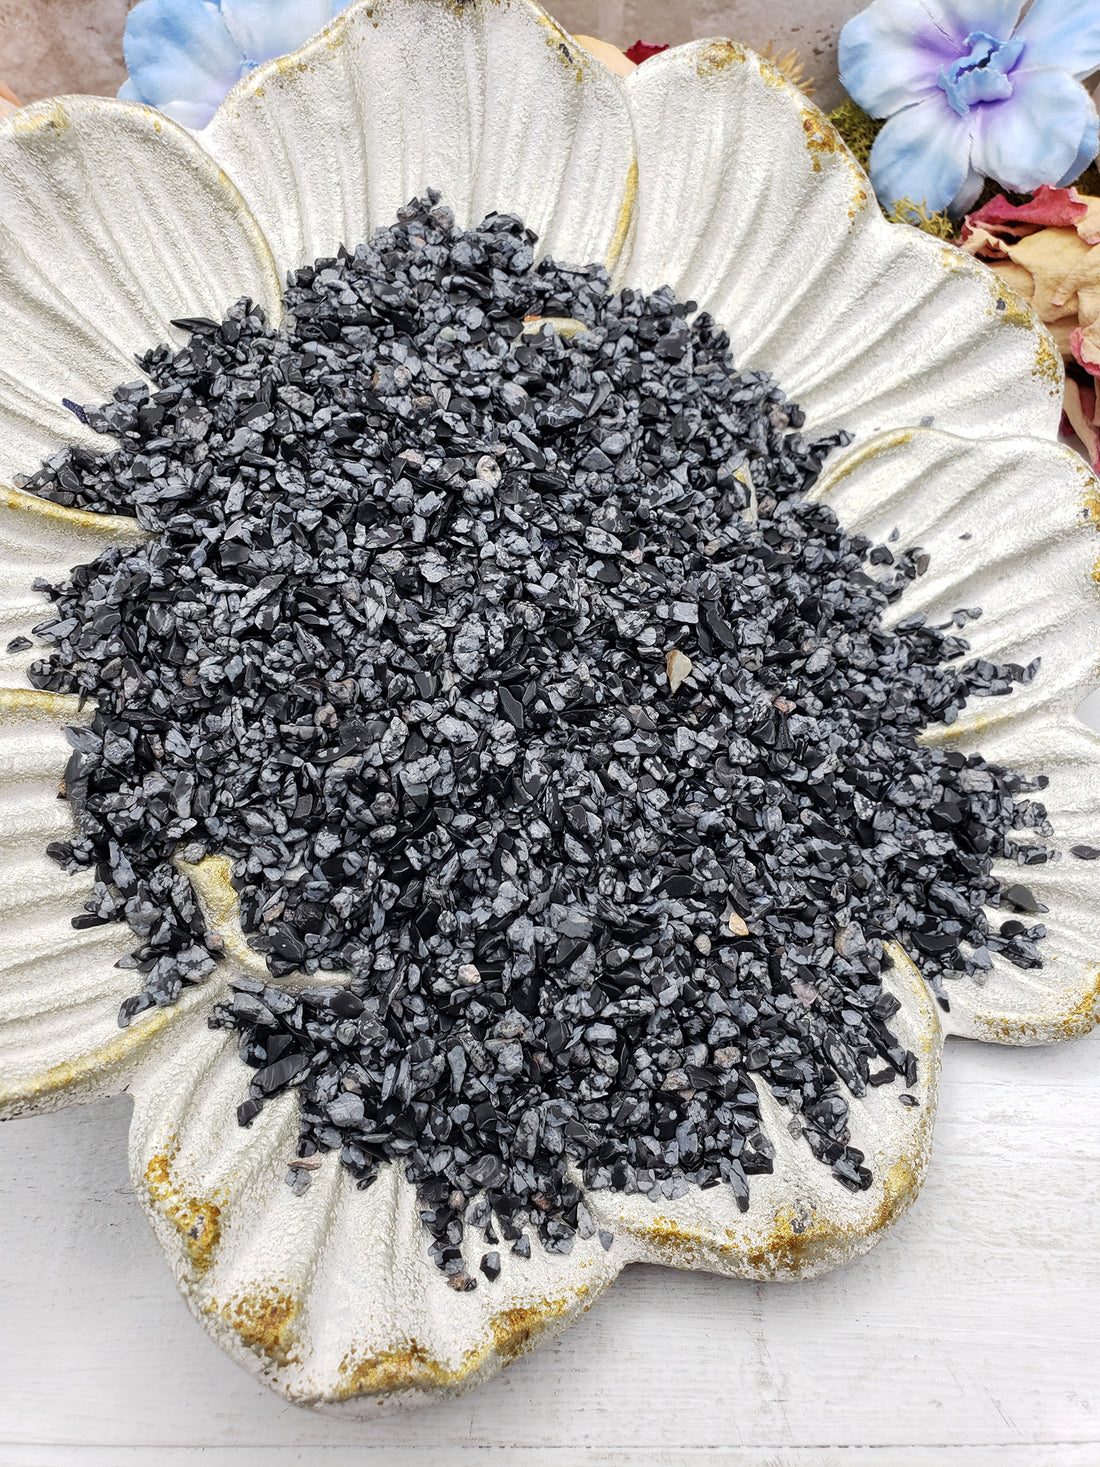 Seven ounces of snowflake obsidian on floral dish display